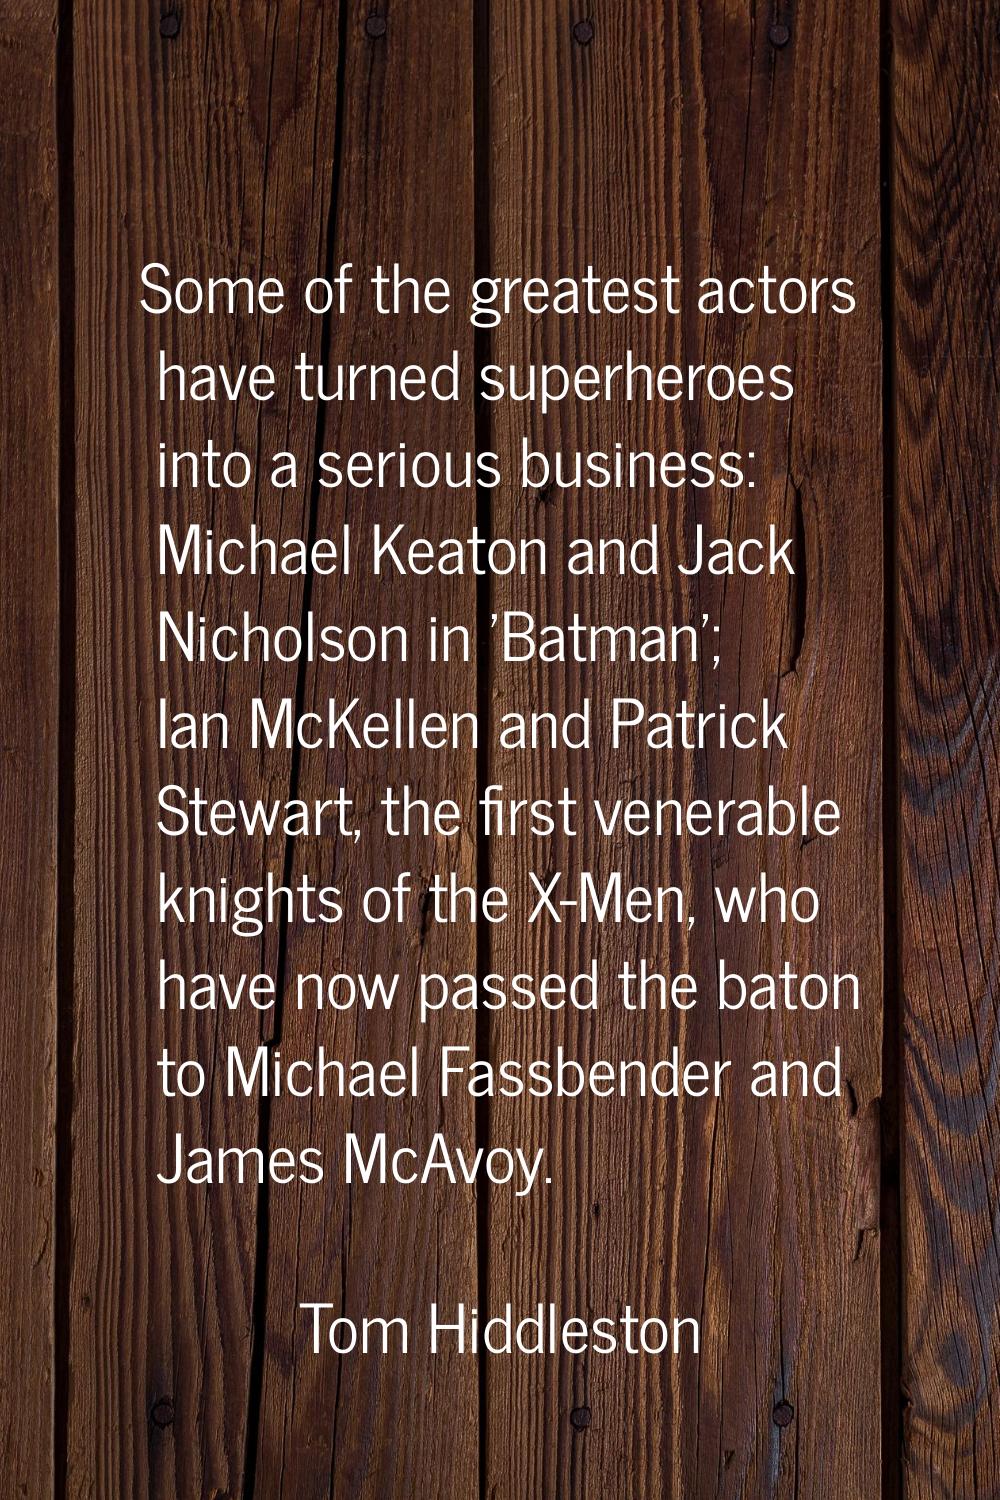 Some of the greatest actors have turned superheroes into a serious business: Michael Keaton and Jac